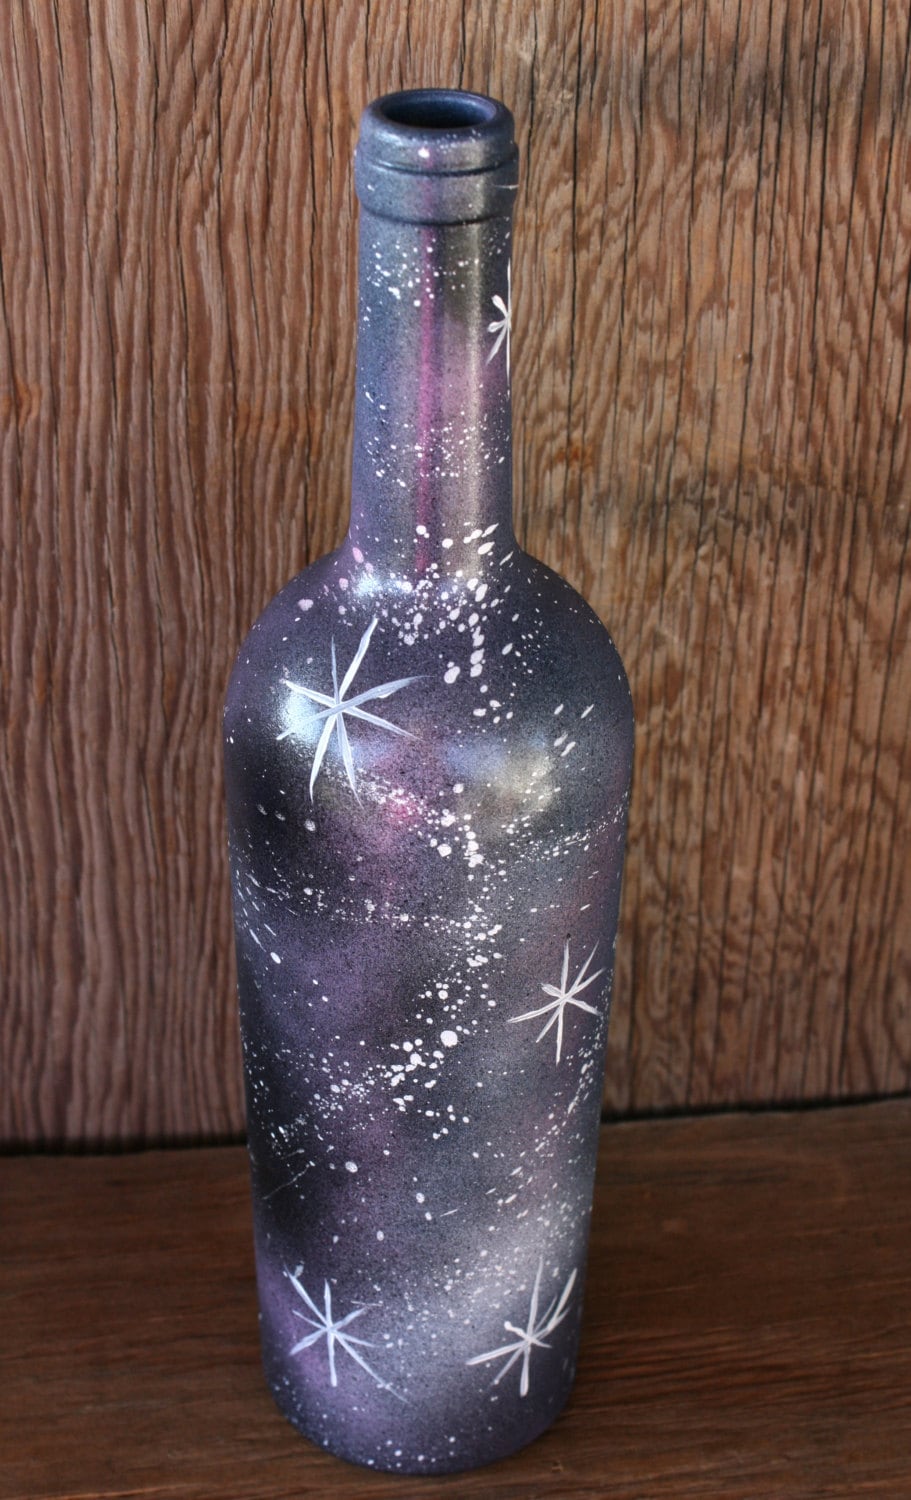 Galaxy hand painted wine bottle vase by LucentJane on Etsy